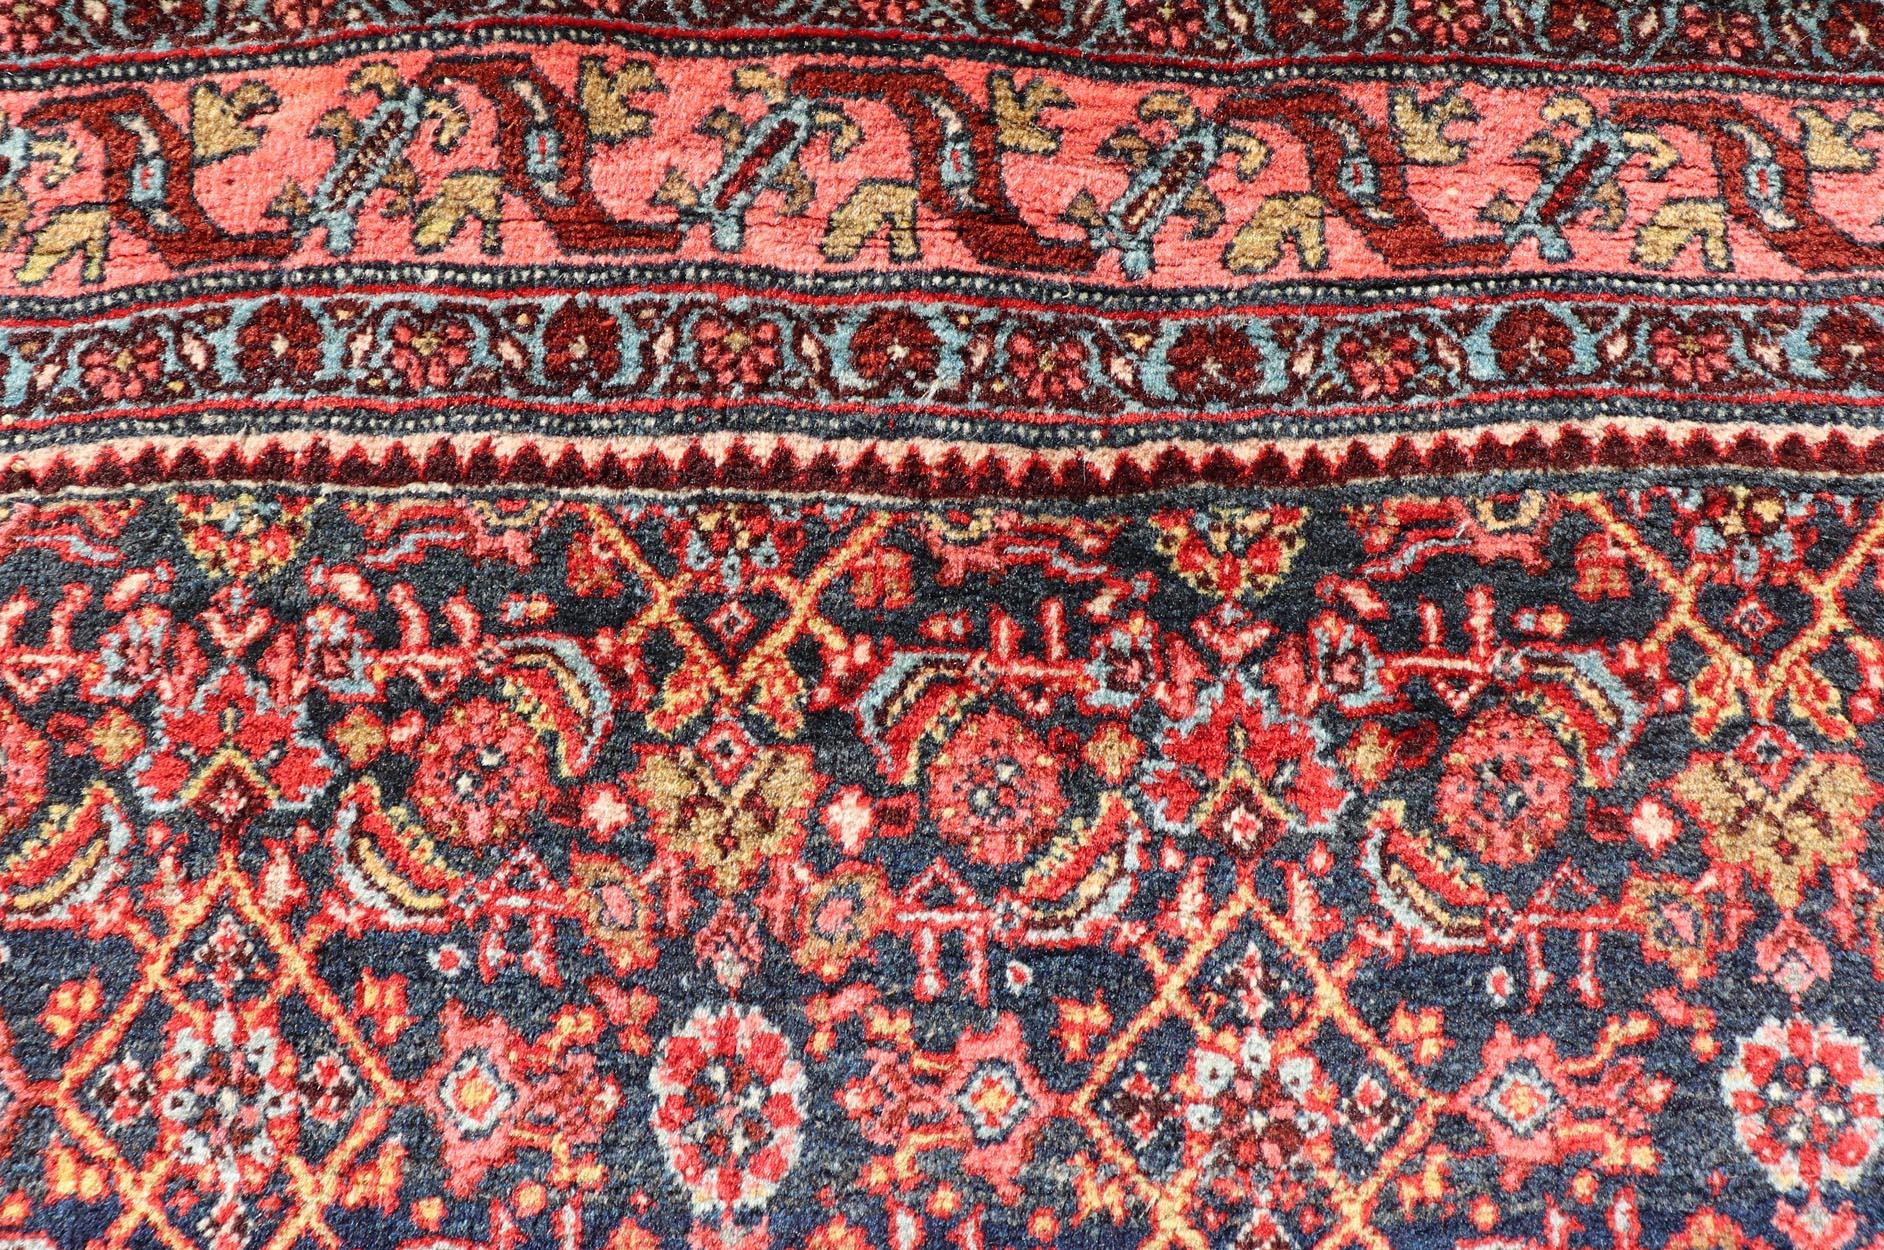 Measures: 4'5 x 6'7 

The rug has a central medallion, surrounded by an intricate floral Herati design. The border utilizes softer colors of pink, blue and yellow to contrast with the background of navy and red-orange design. 

Country of Origin: